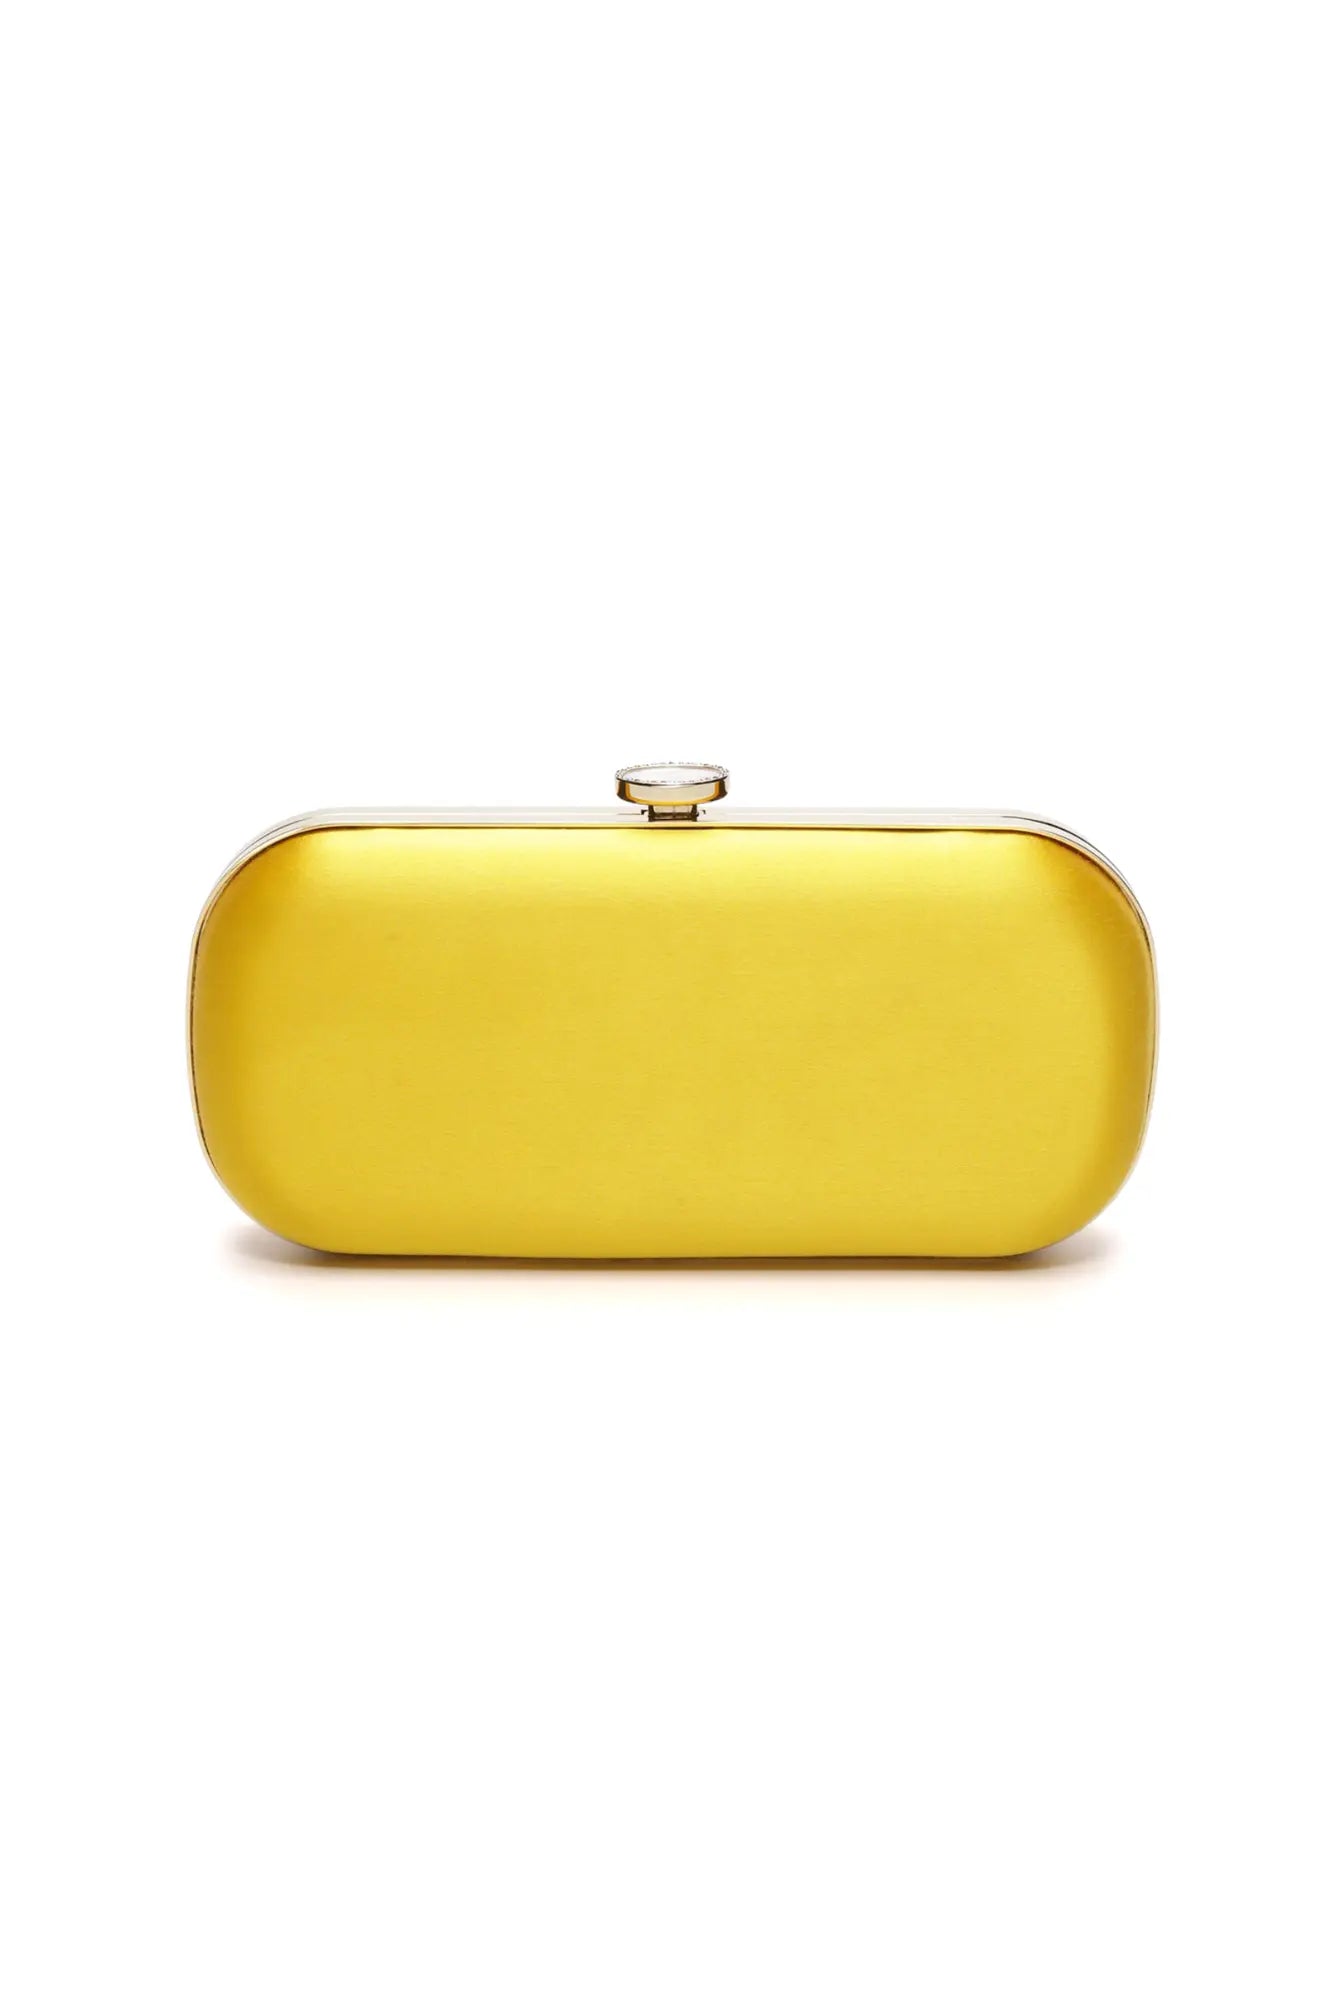 Bella Clutch Limoncello Yellow Grande from The Bella Rosa Collection isolated on a white background.